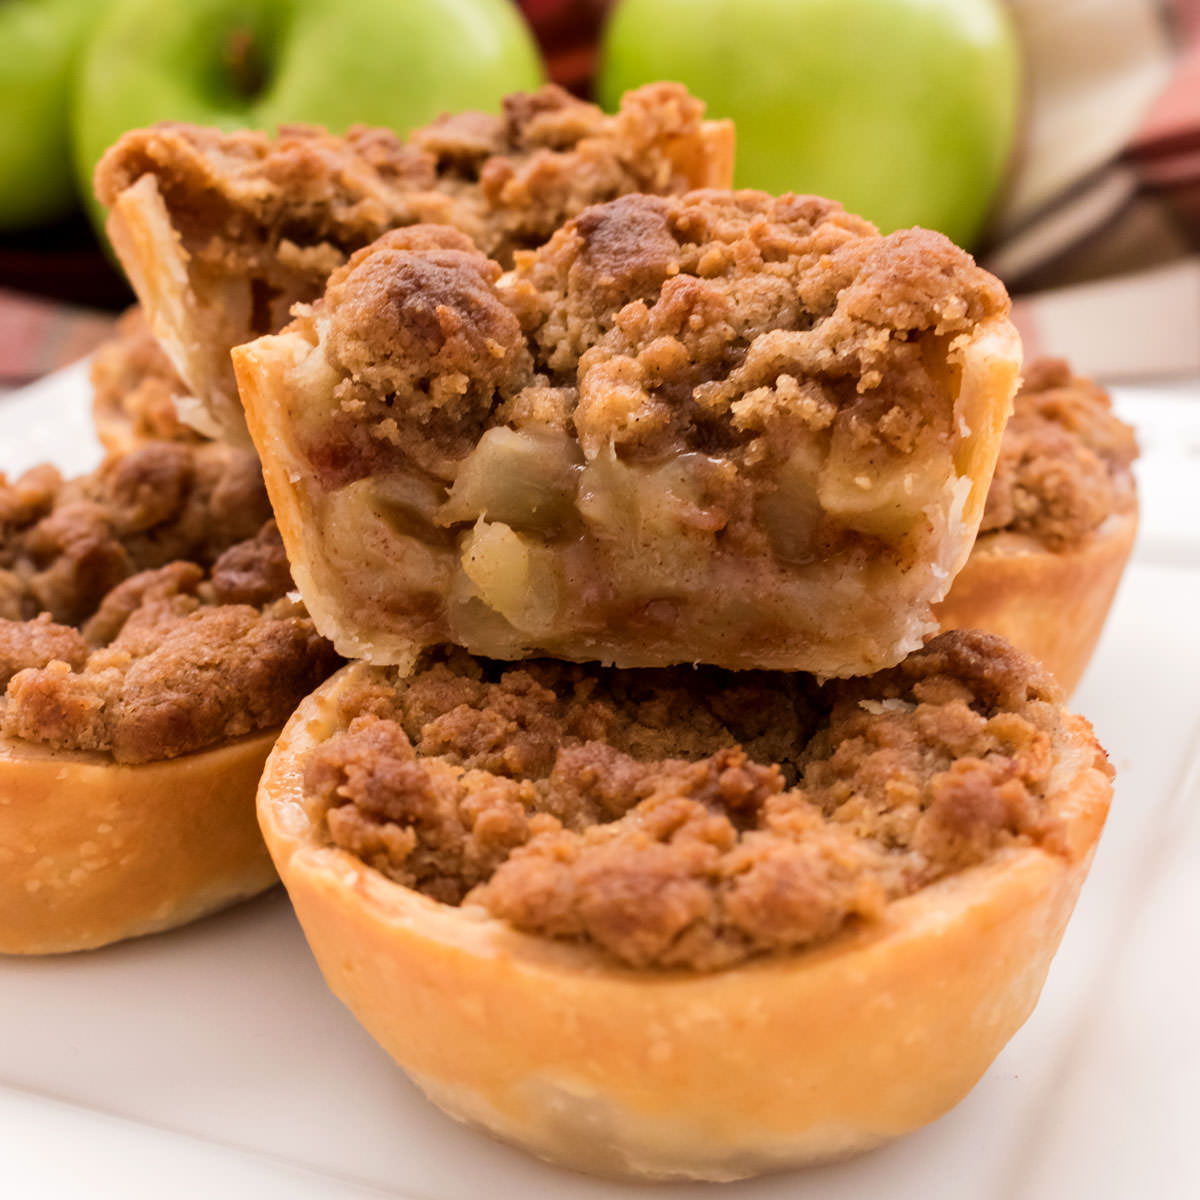 Closeup on a Mini Apple Pie that has been cut in half to show the filling and the crumb topping.